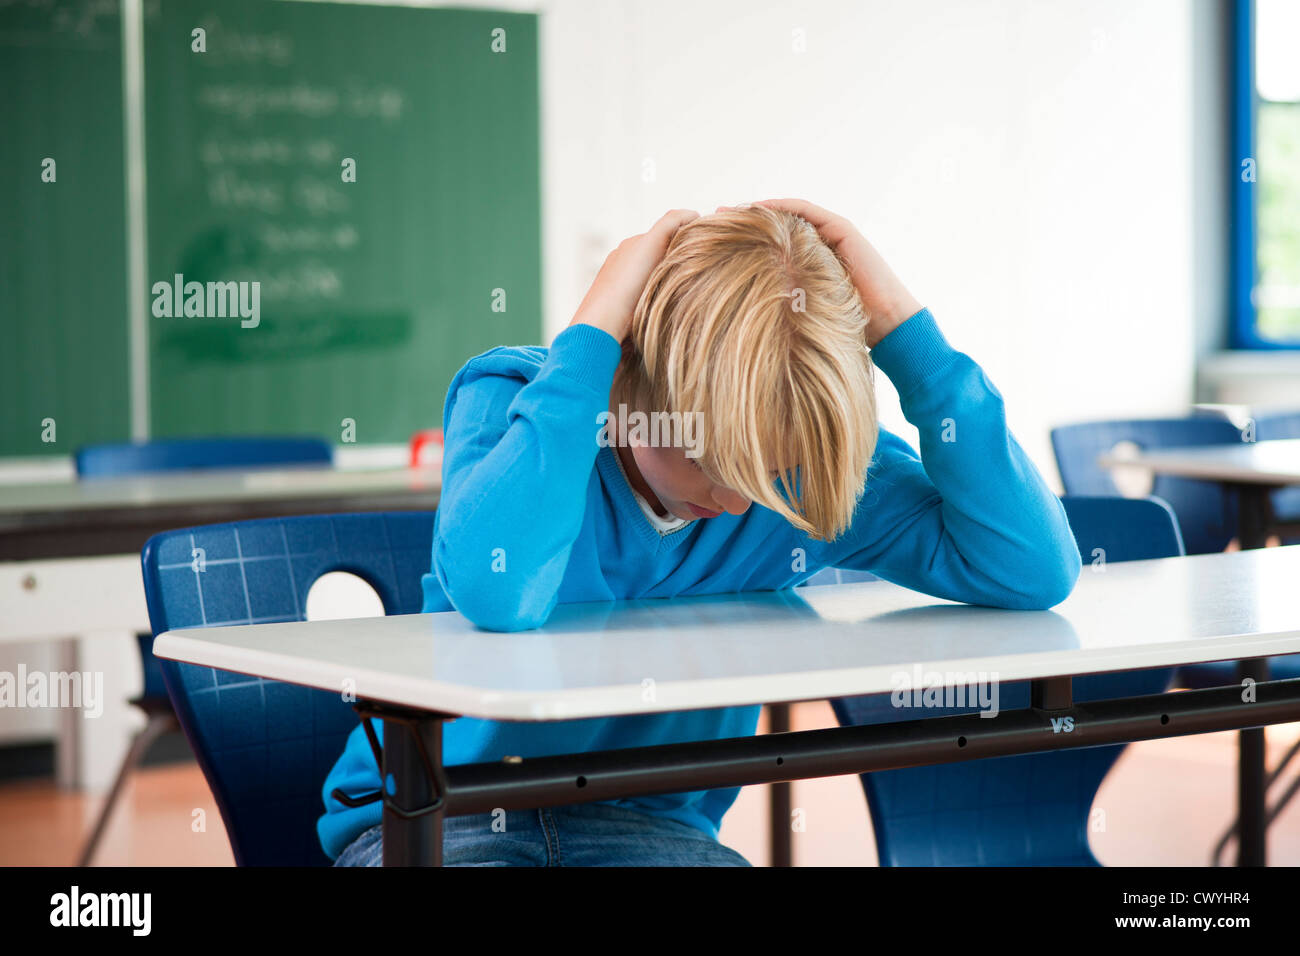 Exhausted schoolboy in classroom Stock Photo